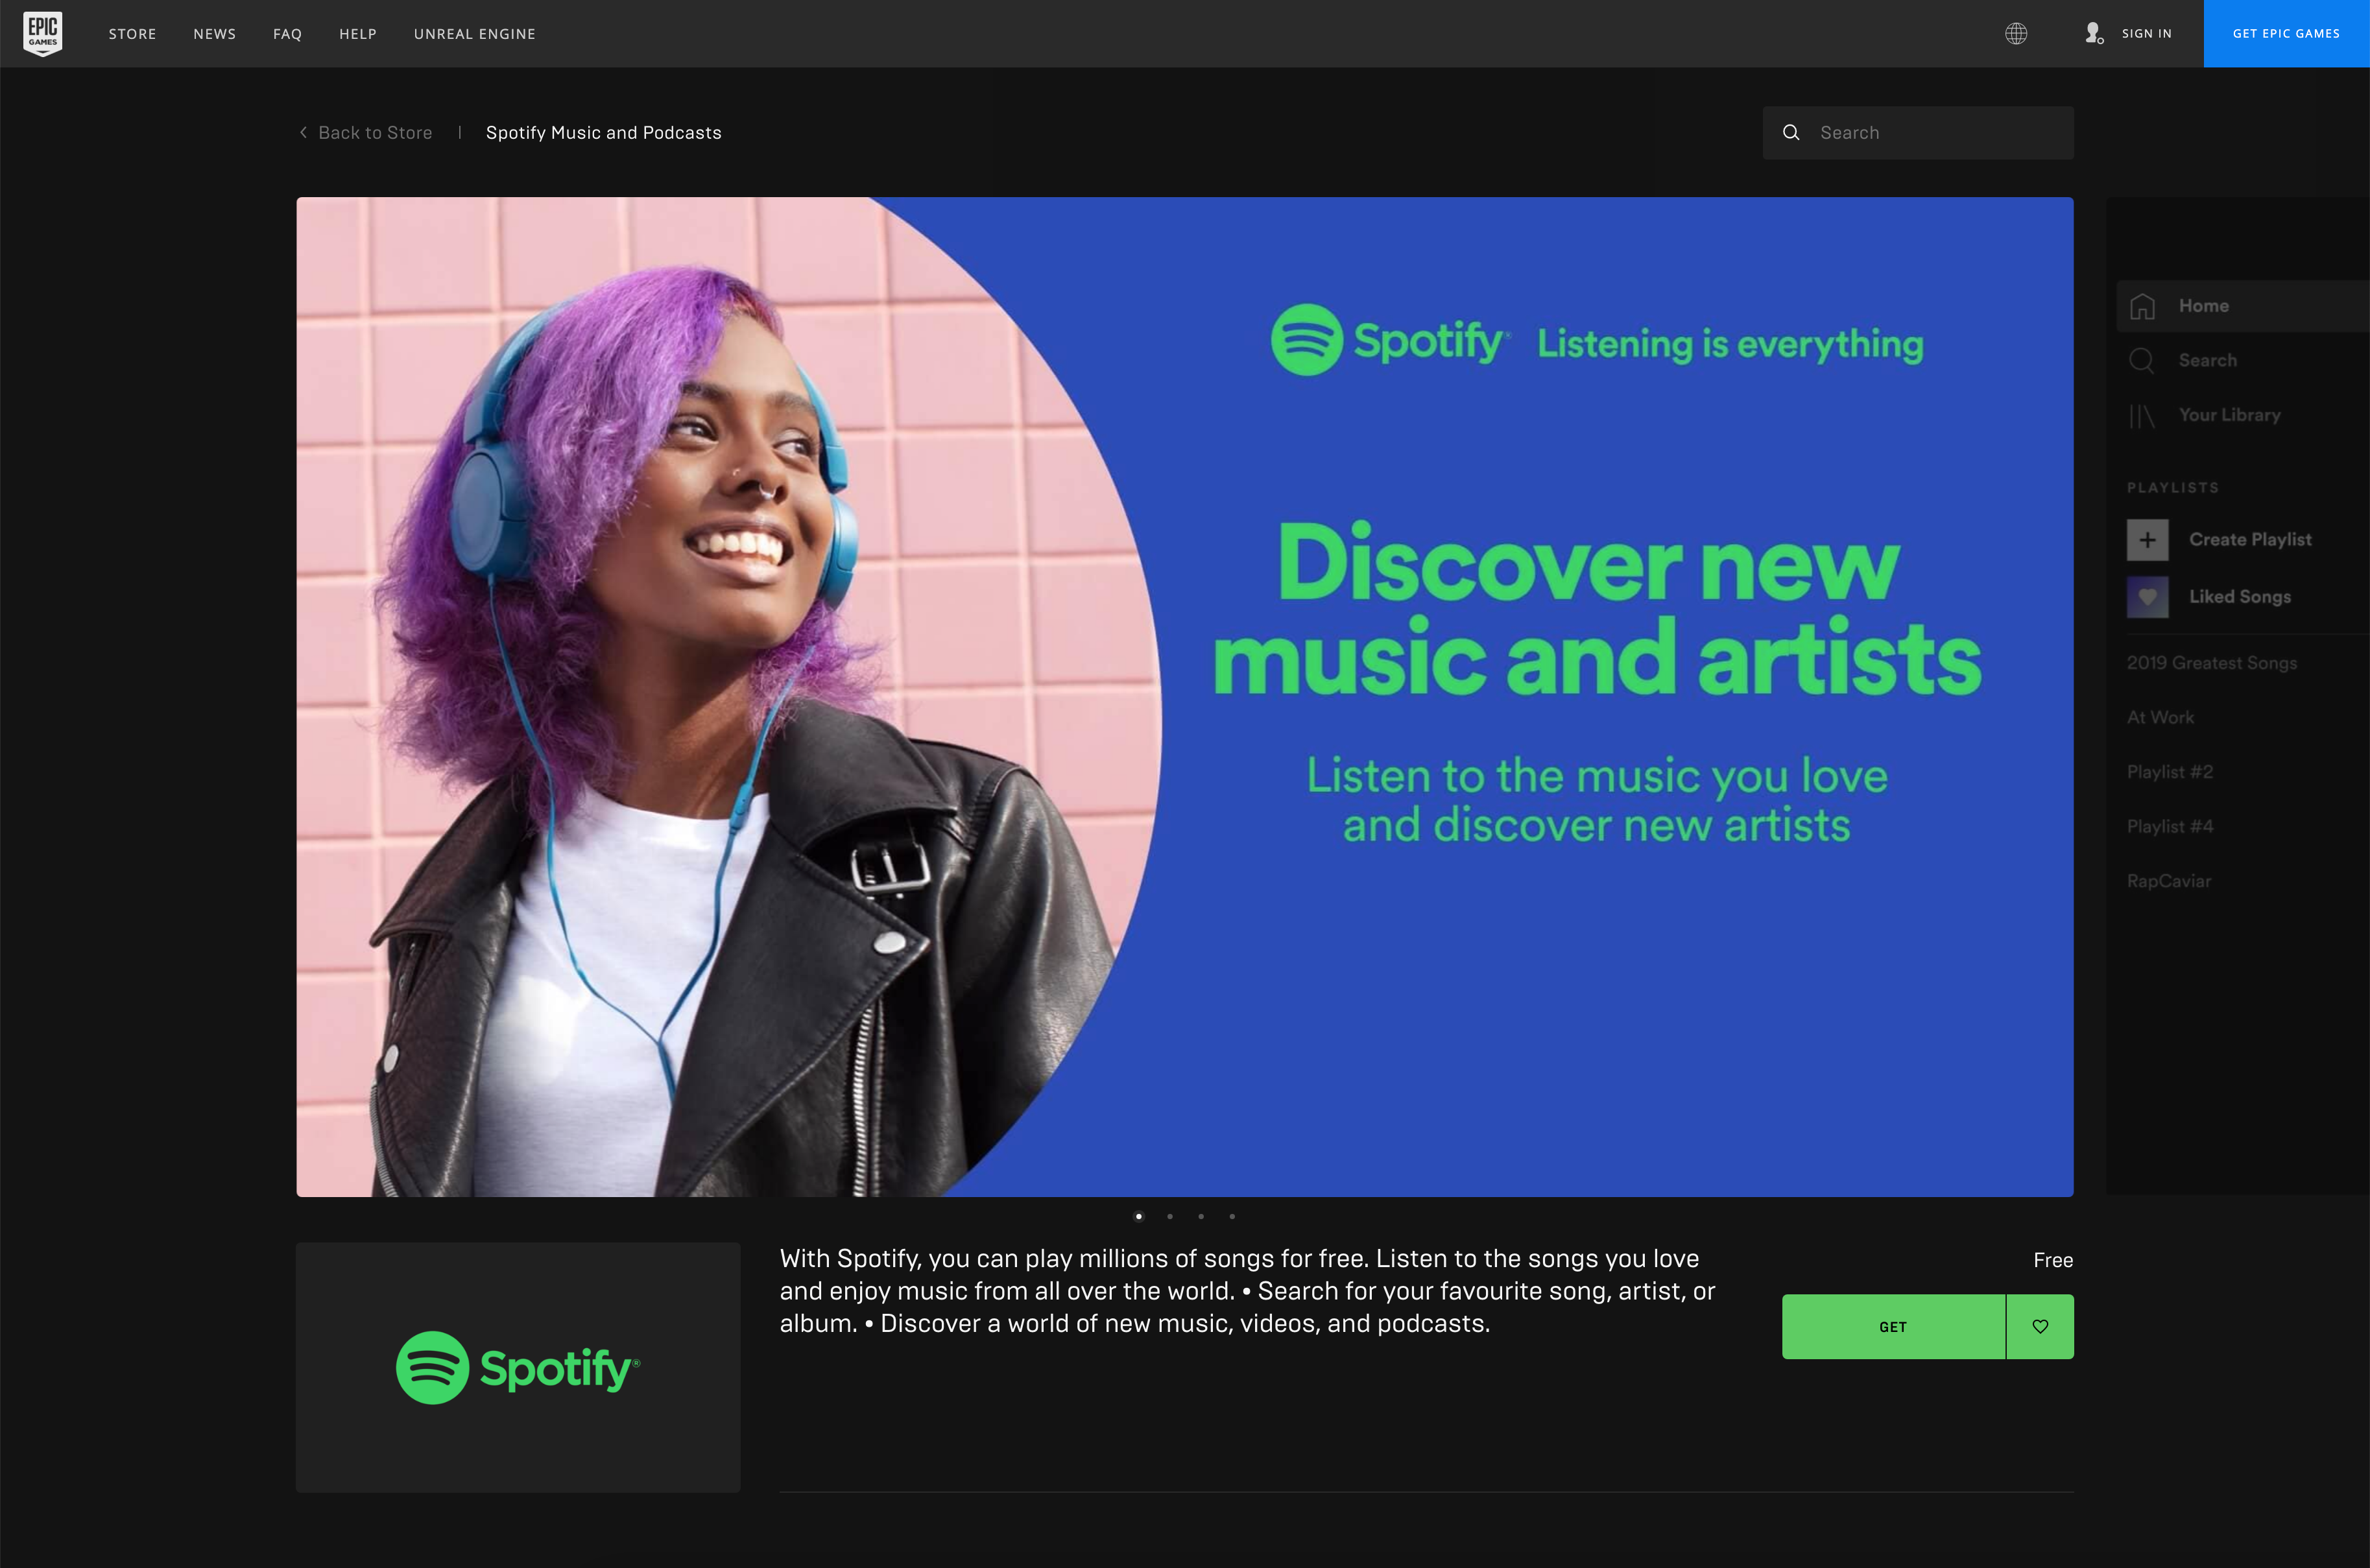 You can now download Spotify on the Epic Games Store